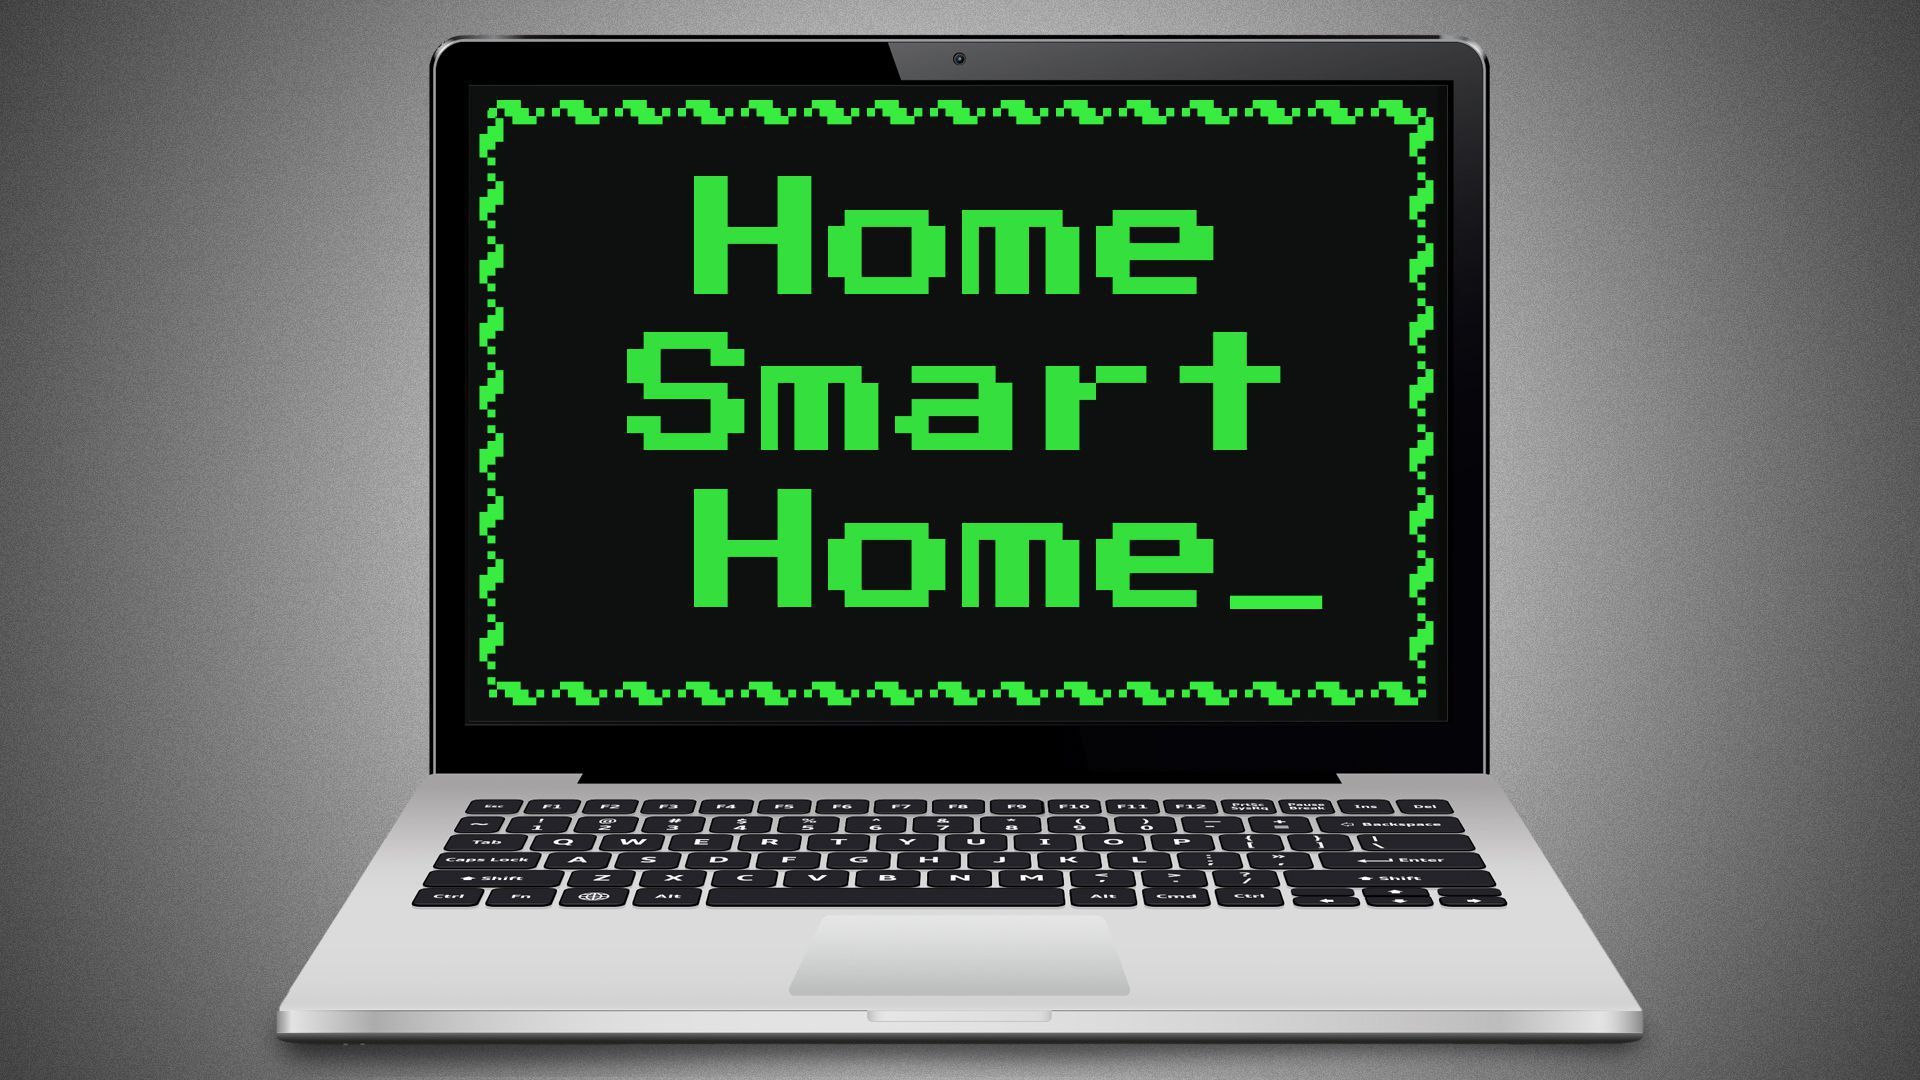 An open laptop with a screen that says "Home smart home."